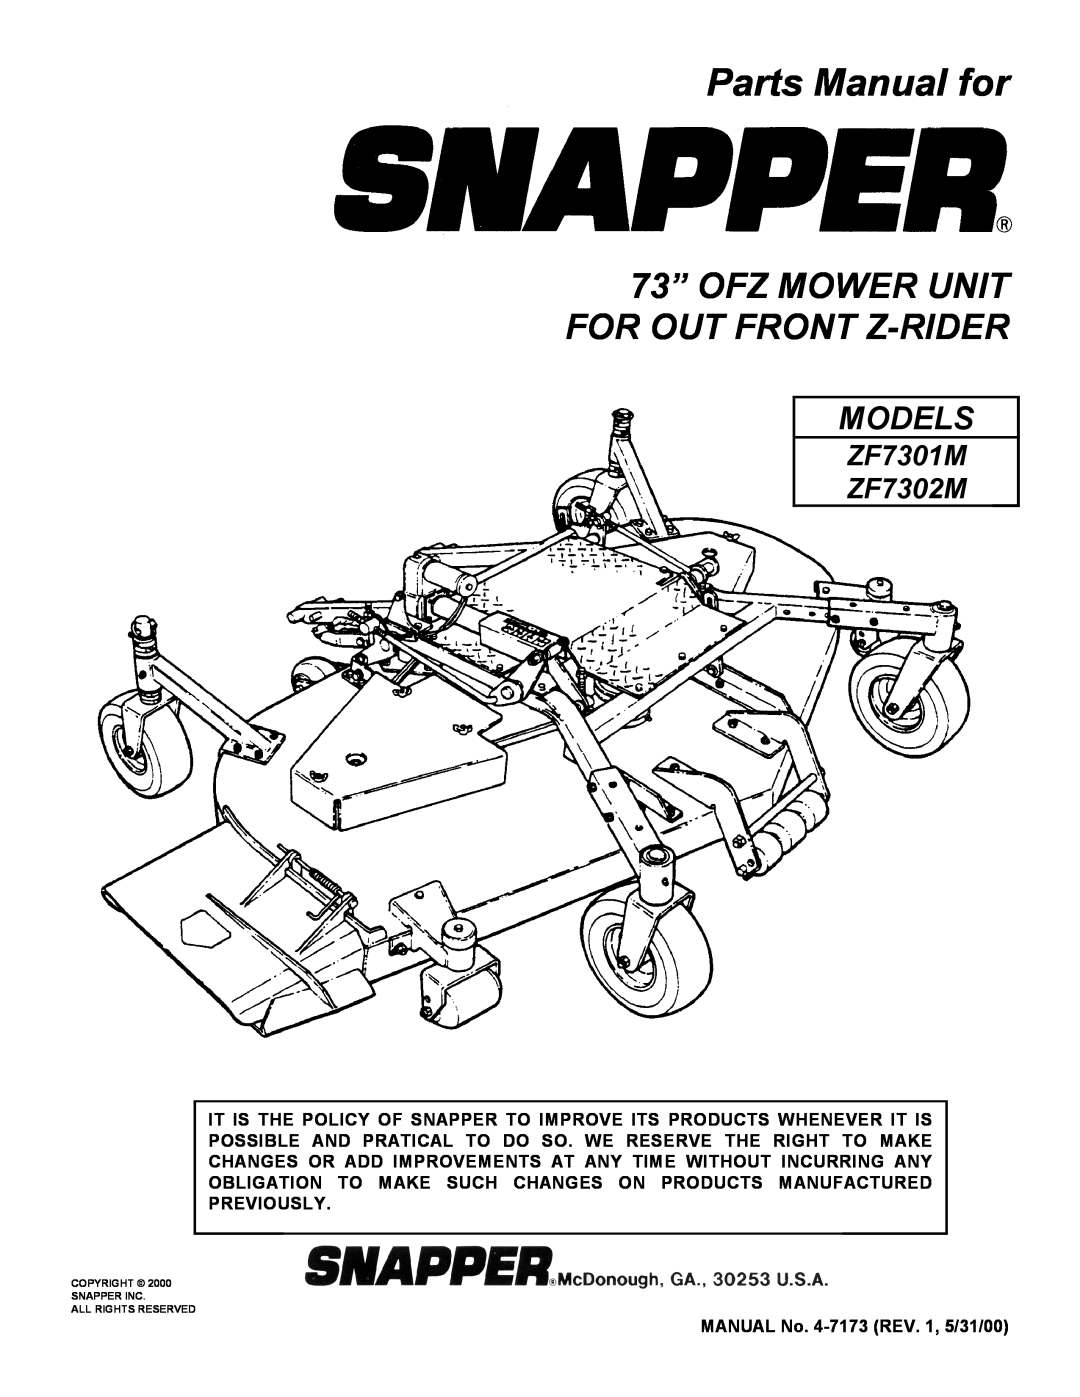 Snapper manual Parts Manual for, Models, ZF7301M ZF7302M, 73” OFZ MOWER UNIT FOR OUT FRONT Z-RIDER 